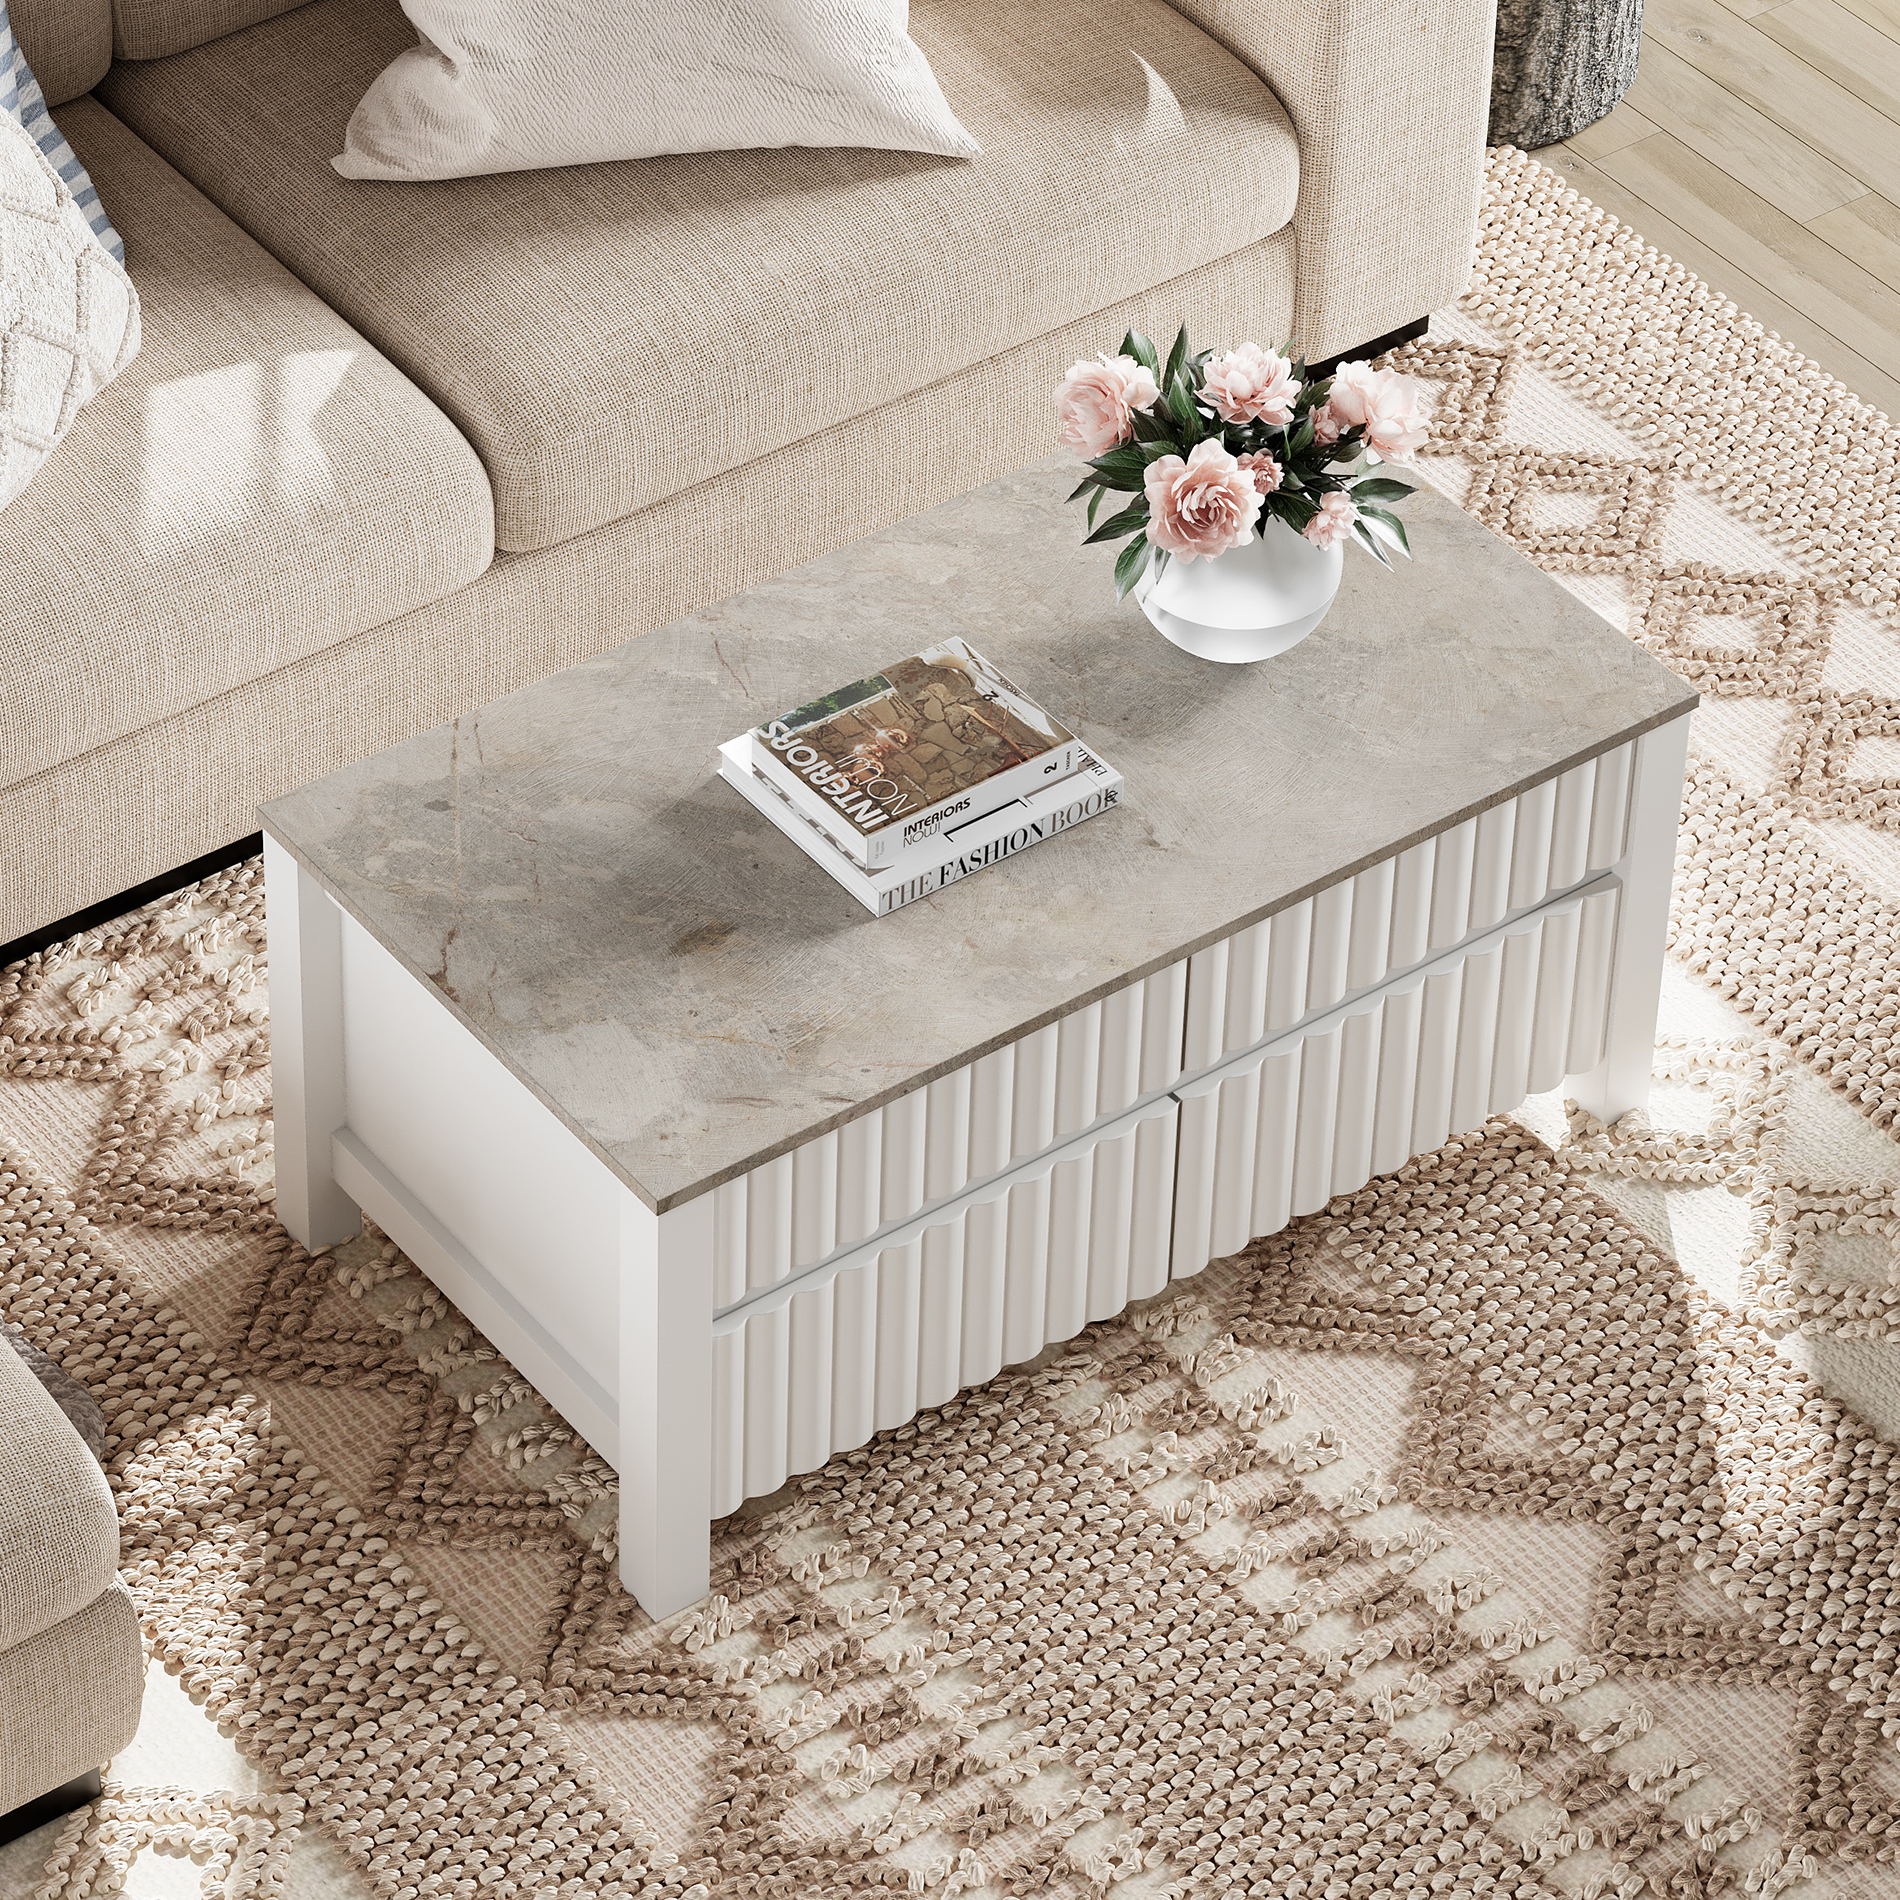 Modern Coffee Table with Sliding Drawers for Living Room, White - image 1 of 6